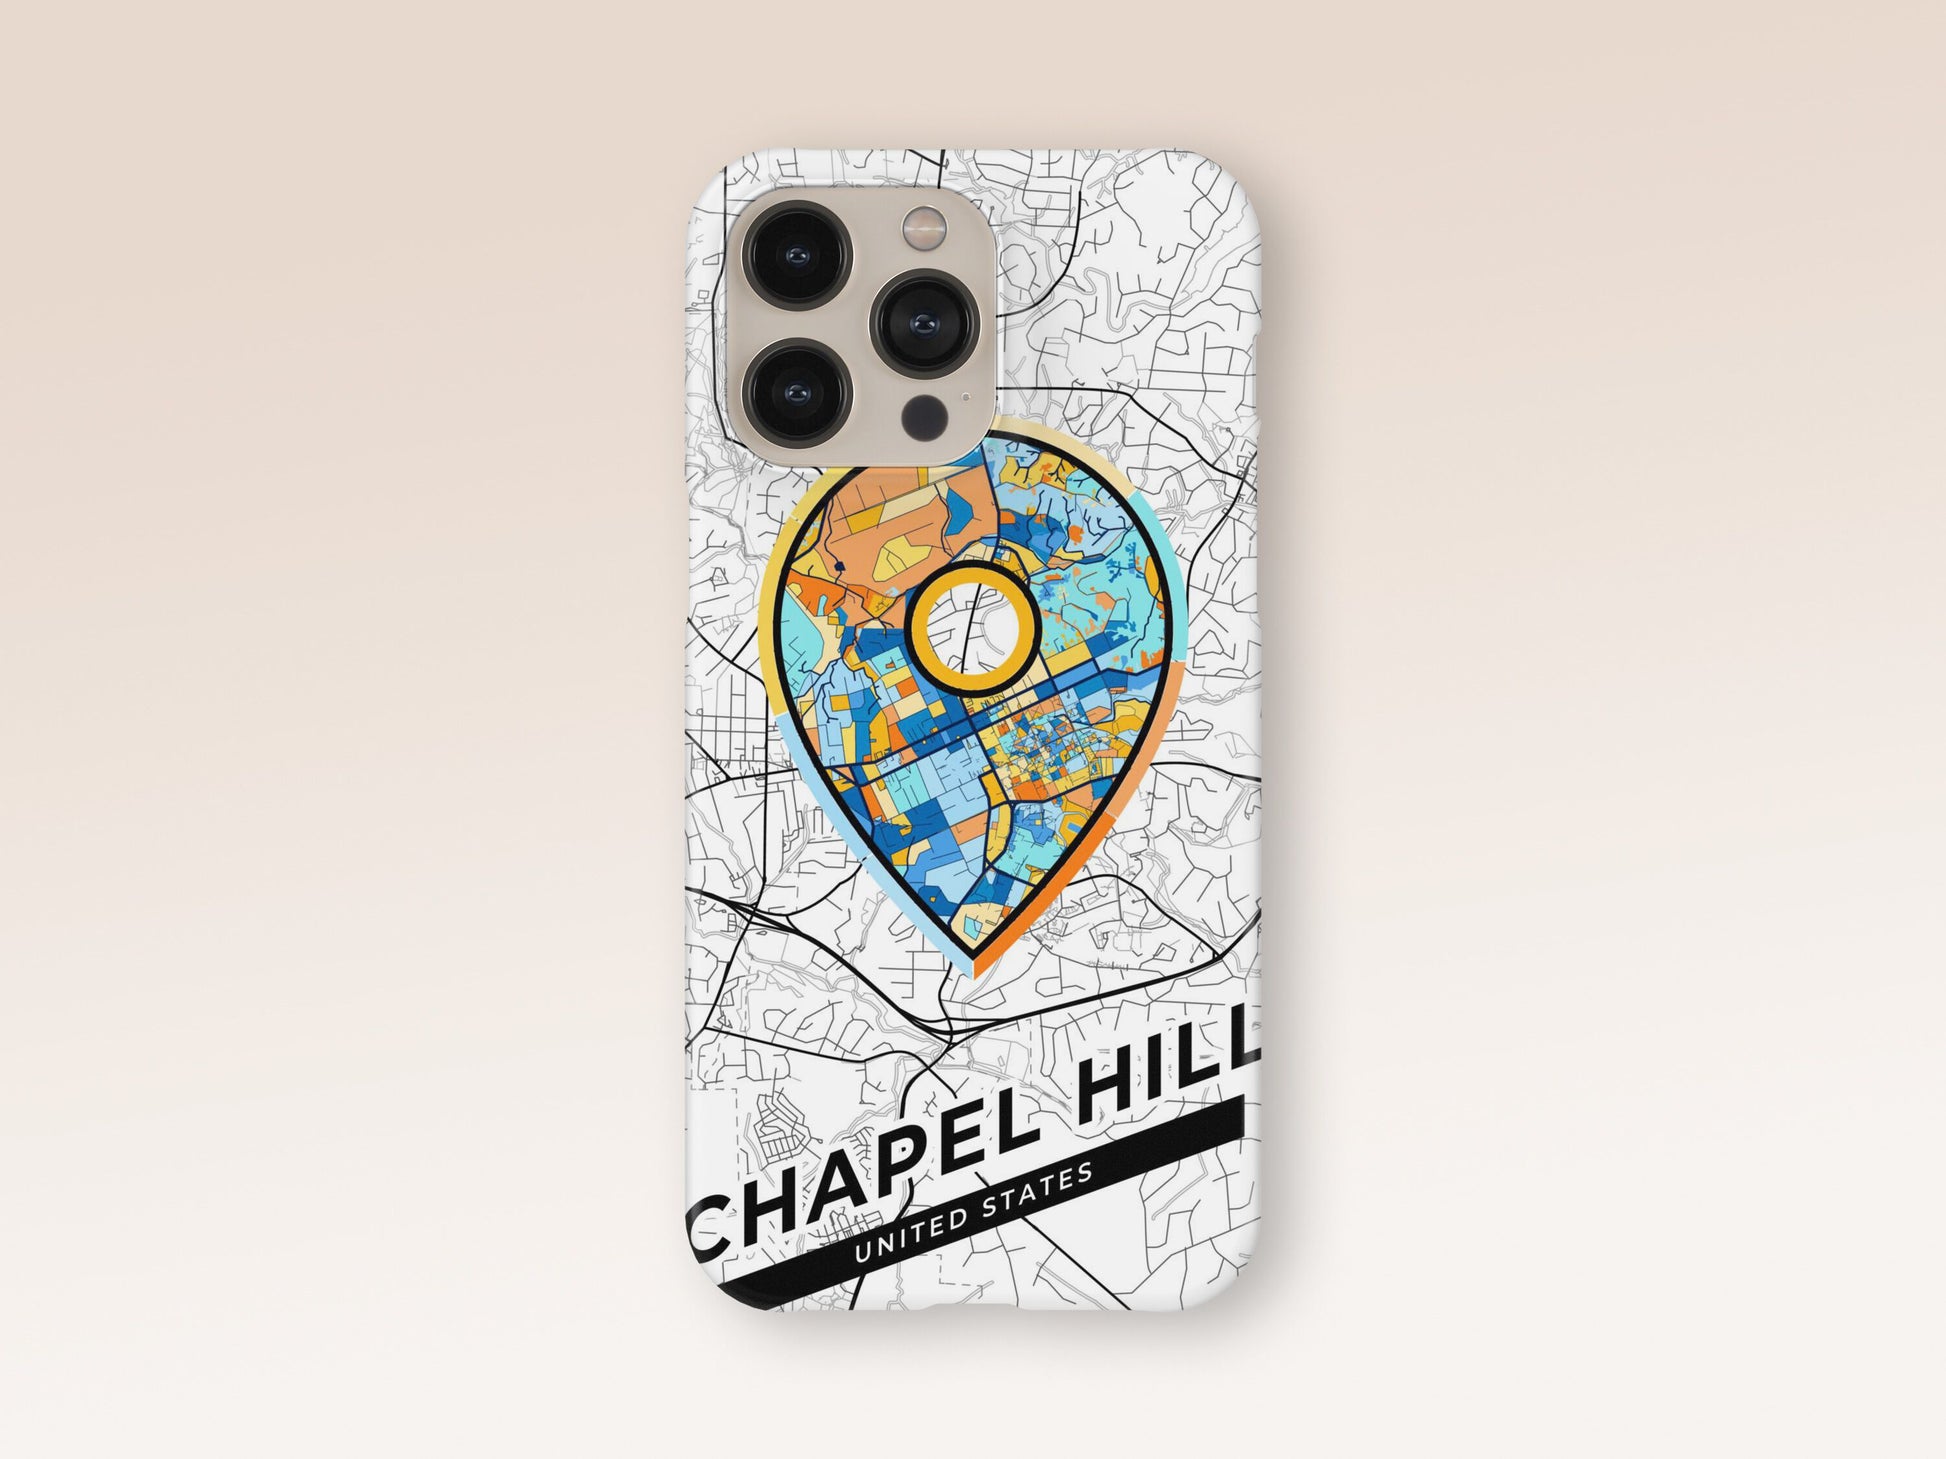 Chapel Hill North Carolina slim phone case with colorful icon. Birthday, wedding or housewarming gift. Couple match cases. 1